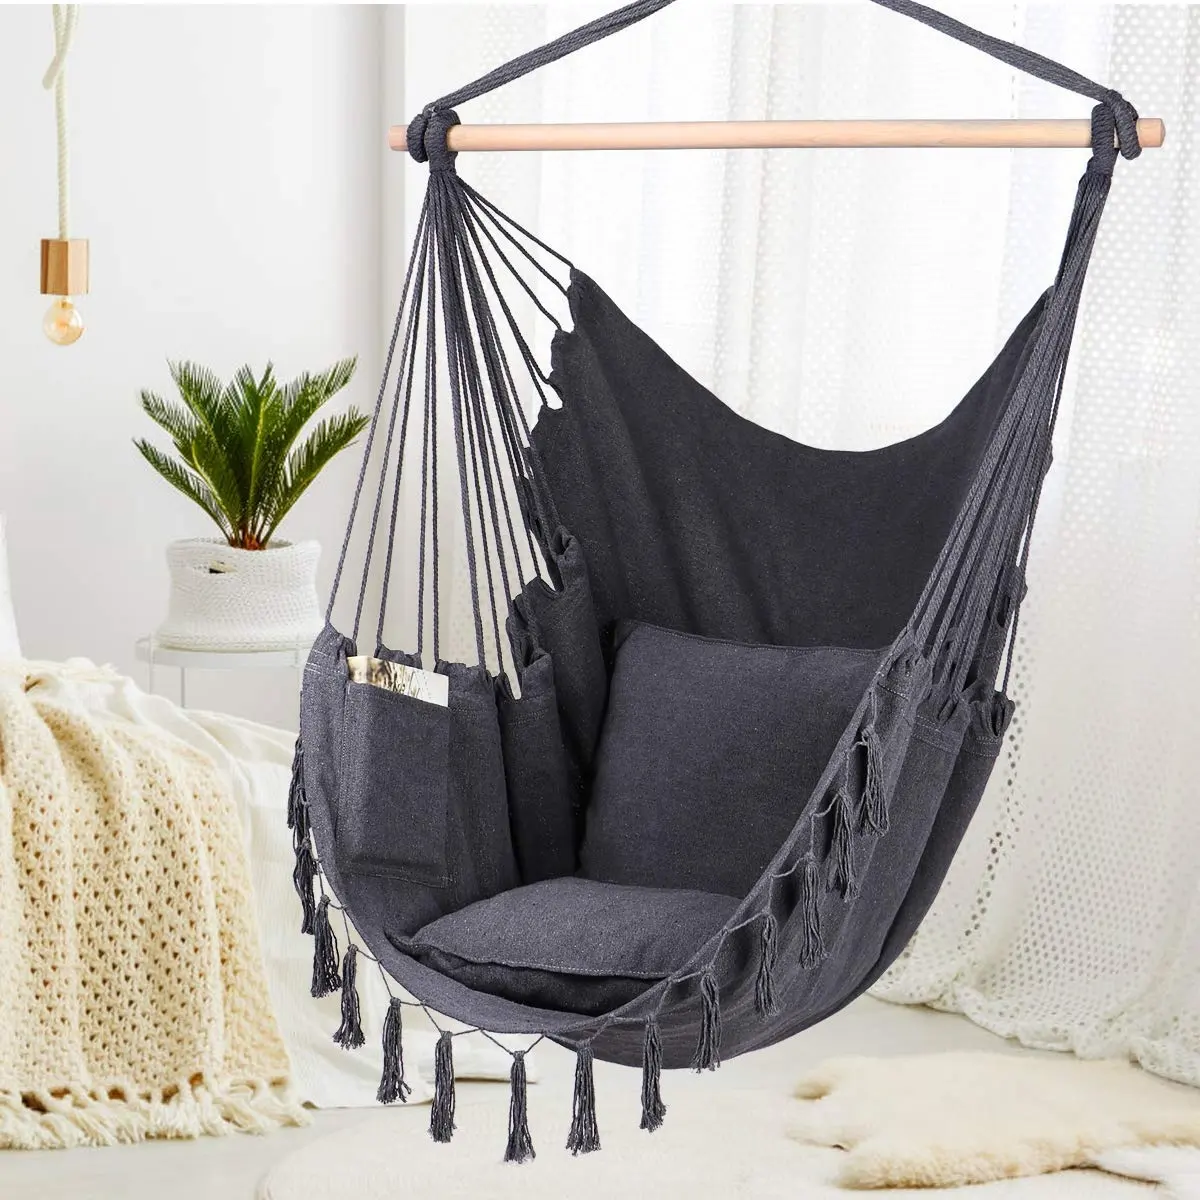 Hammock swing chairs Indoor Chair Hammock Canvas Fabric Washable Foldable One Person Hammock Hanging Chair